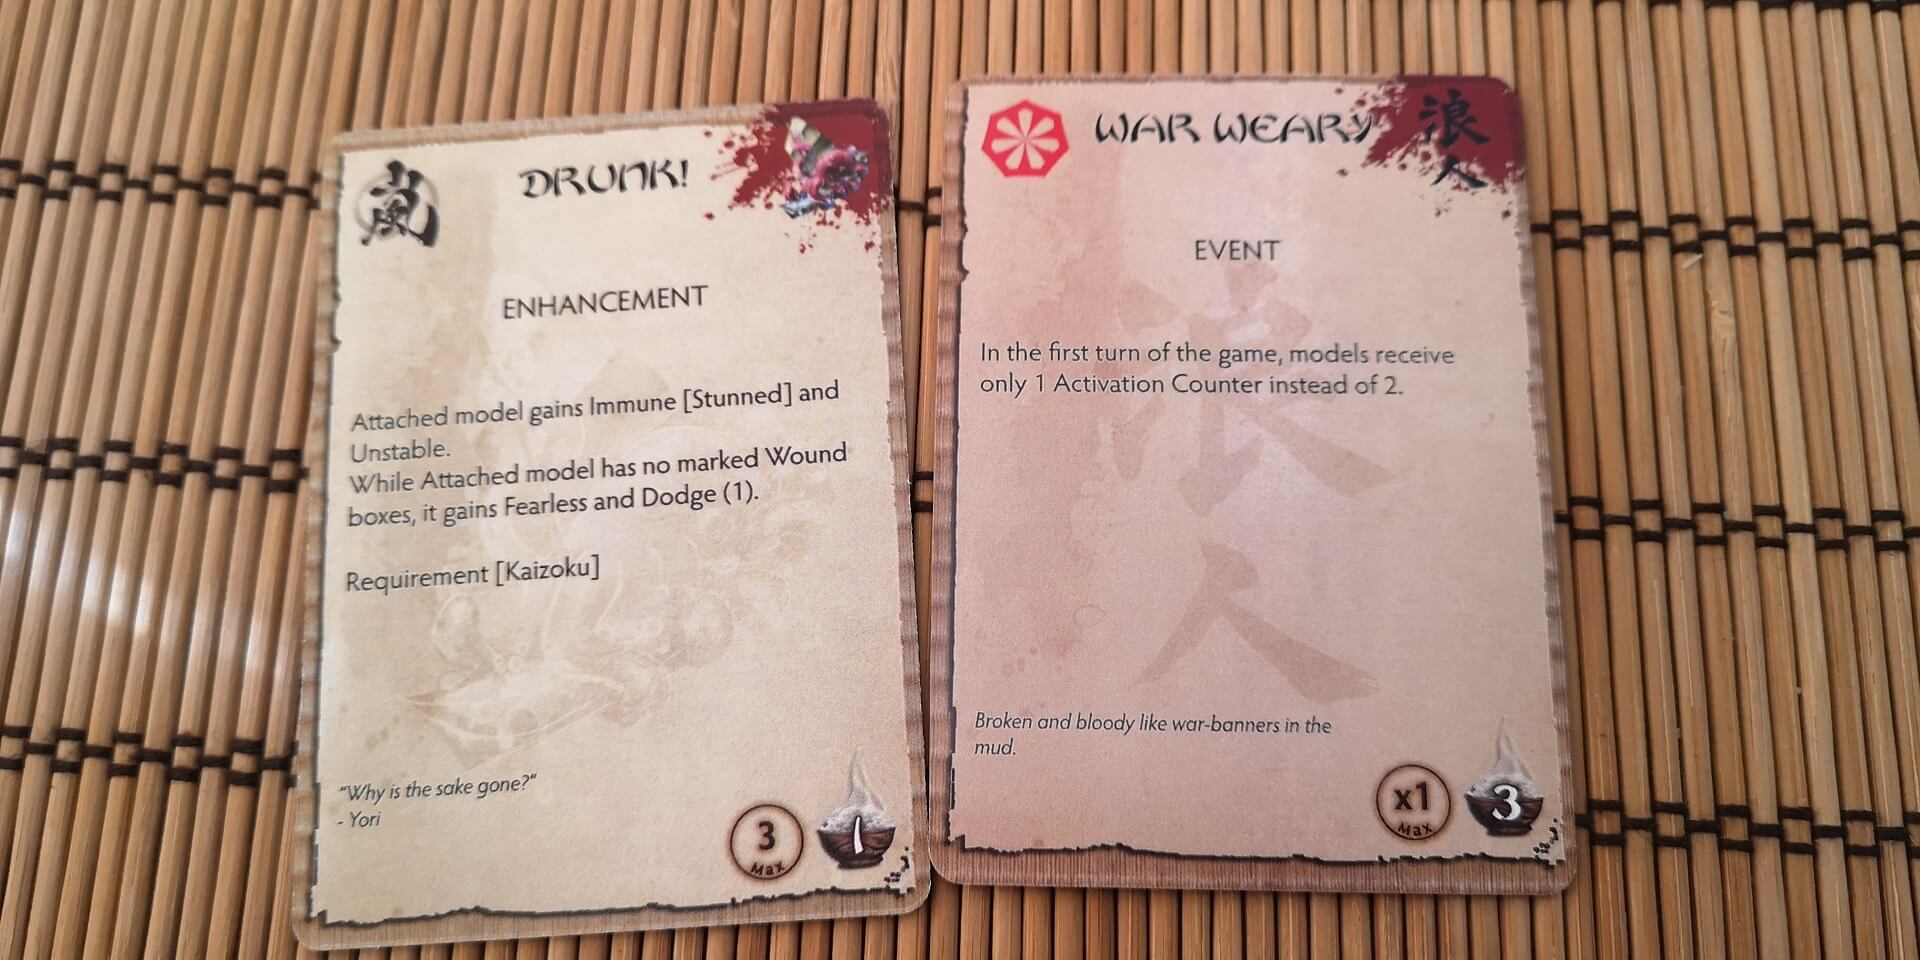 A side by side image to compare the quality of a card from the Bushido Year of the Risen Sun and Weeping Sky decks.